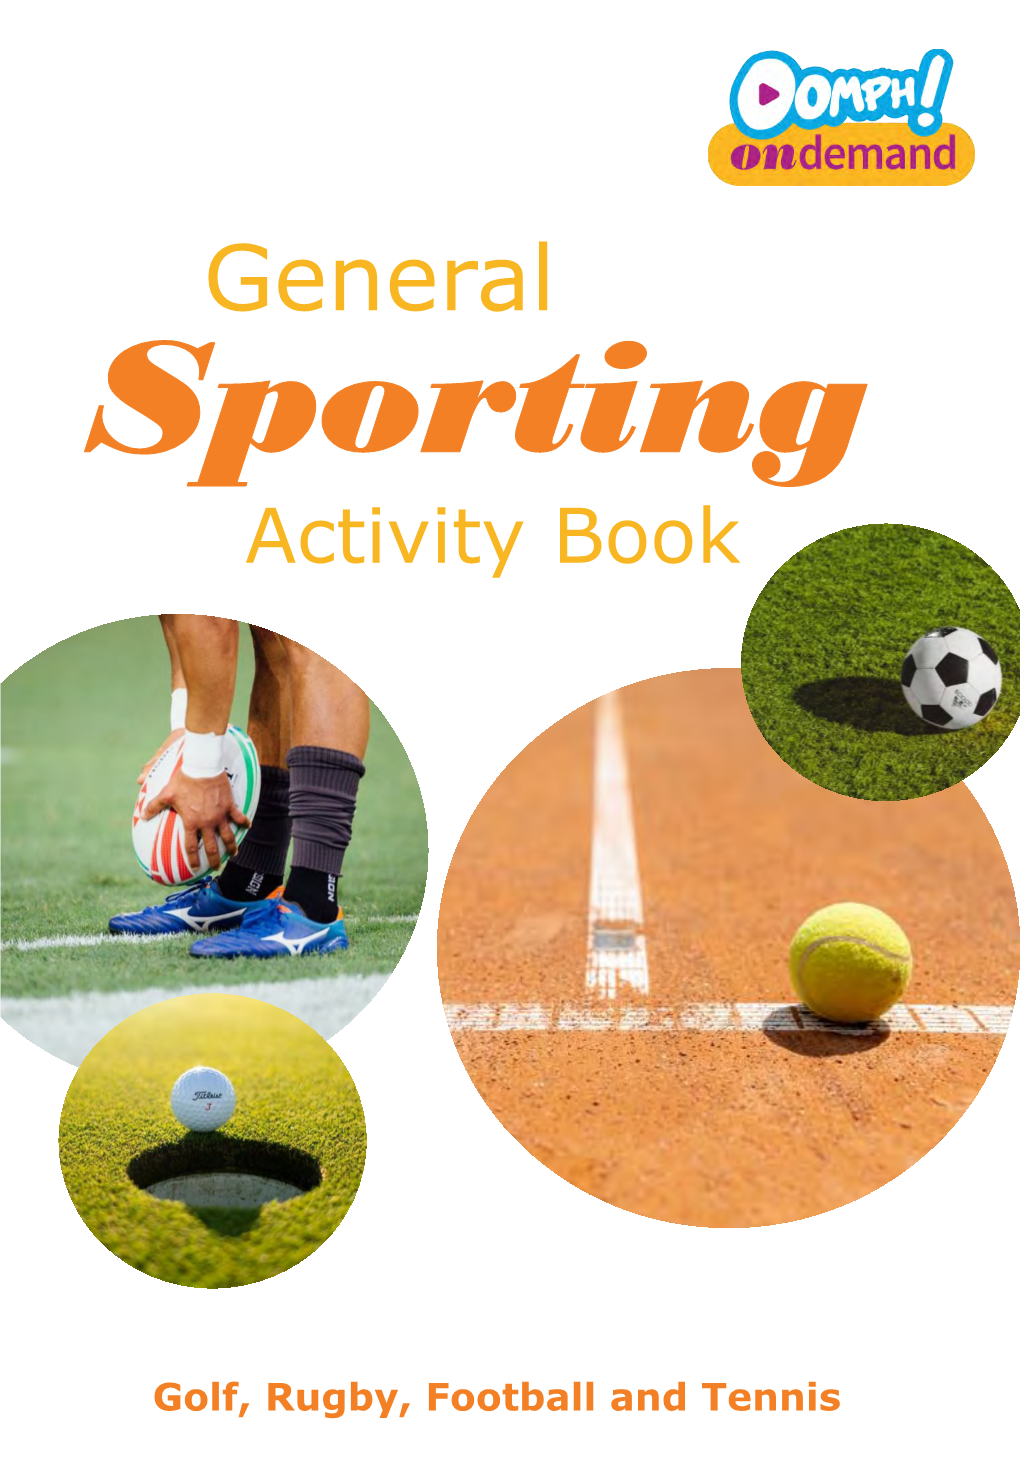 General Sporting Activity Book